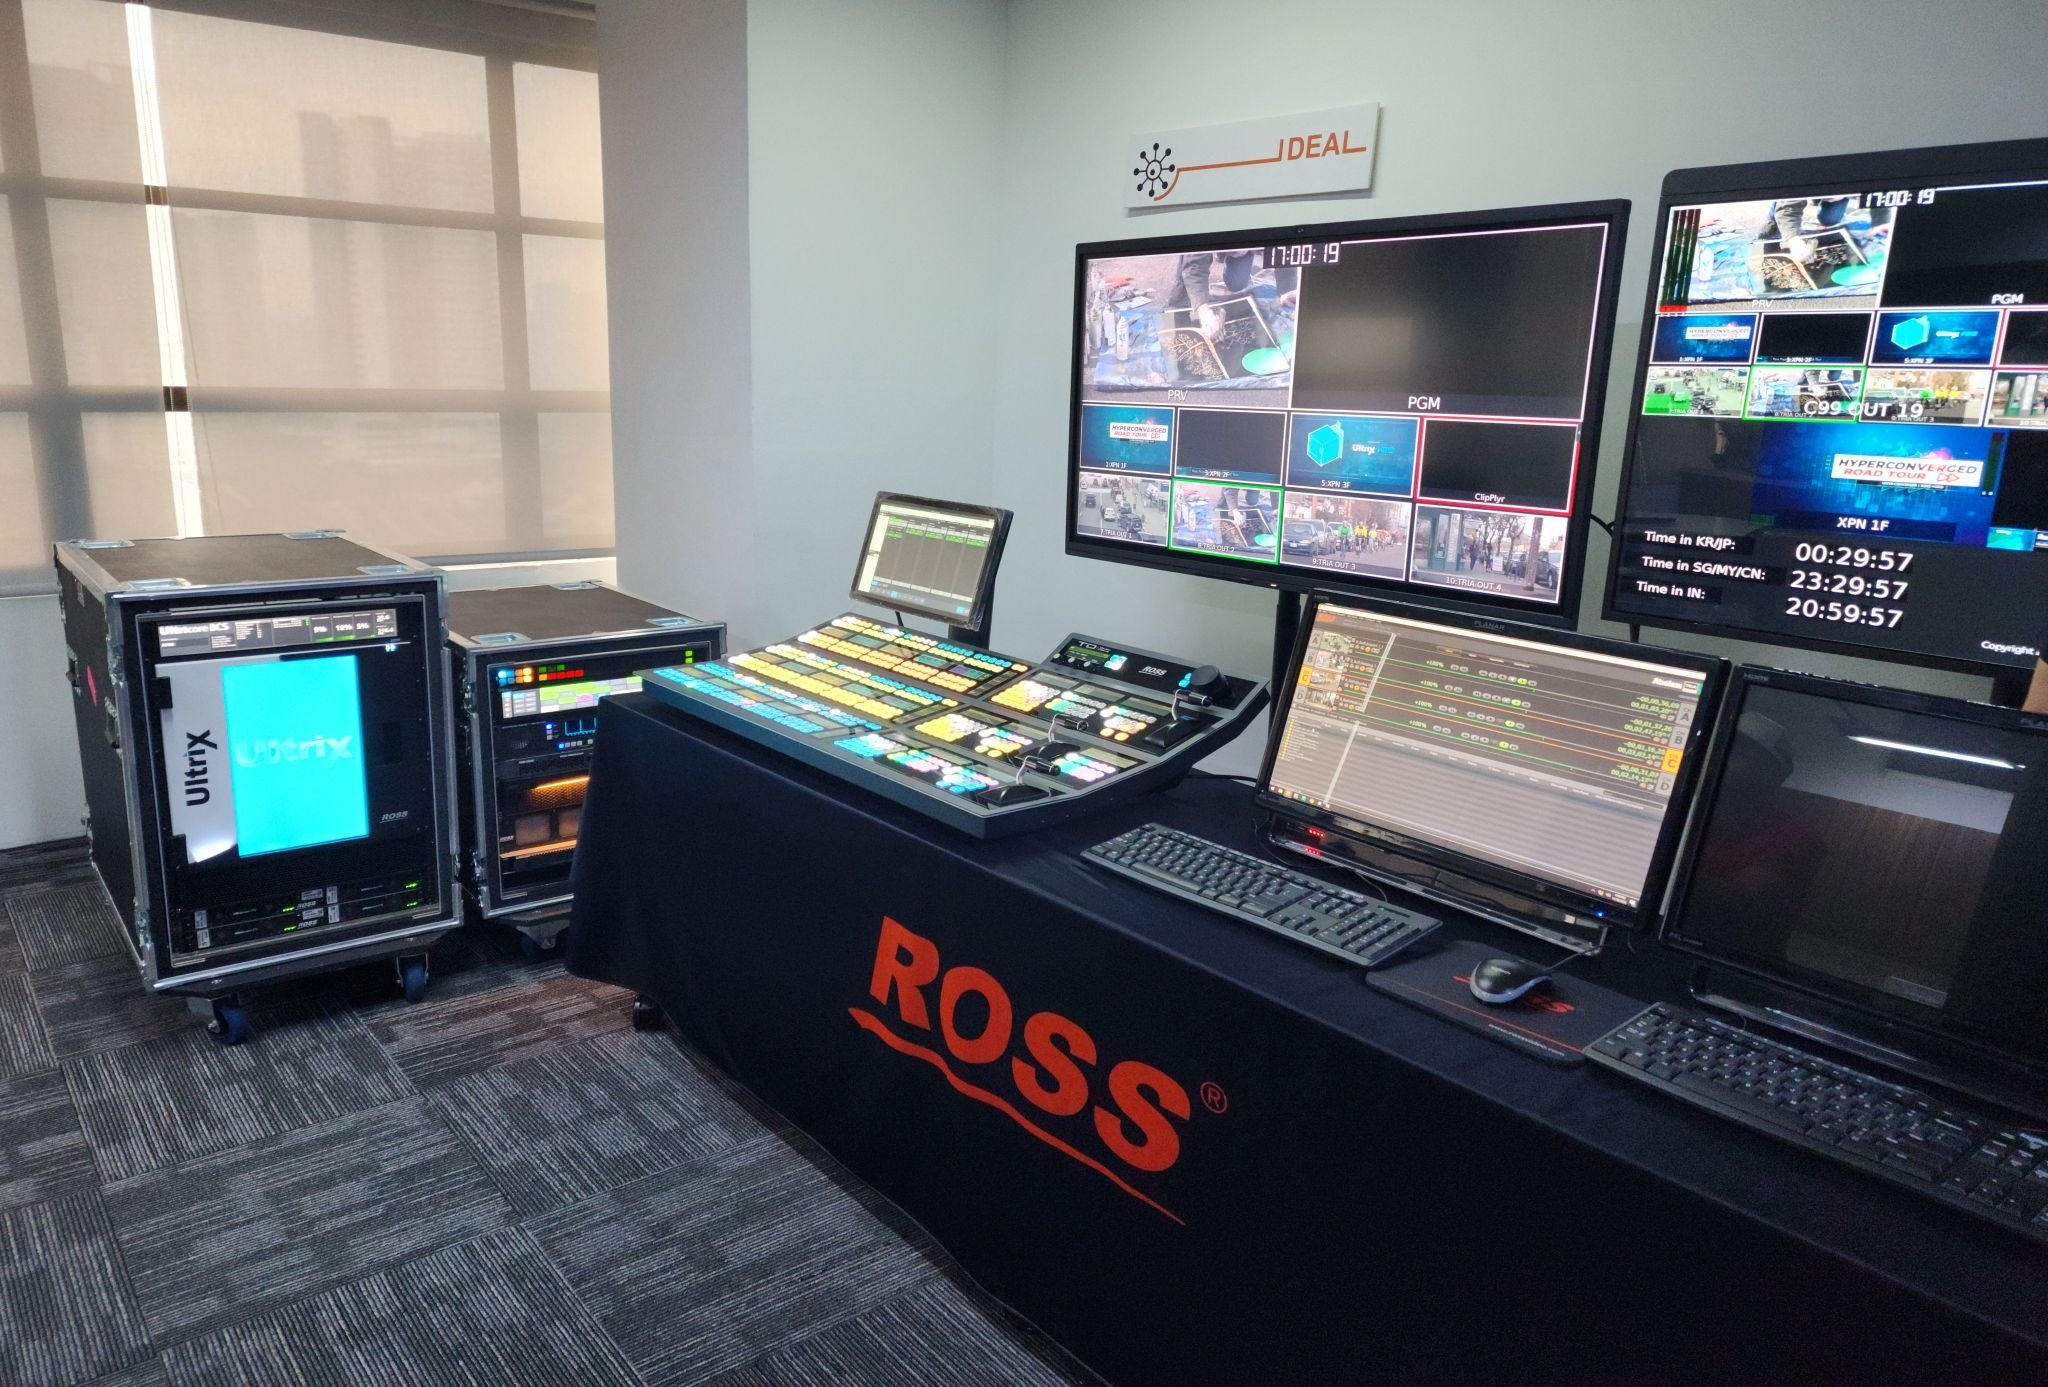 Ross Hyperconverged Broadcast Infrastructure 